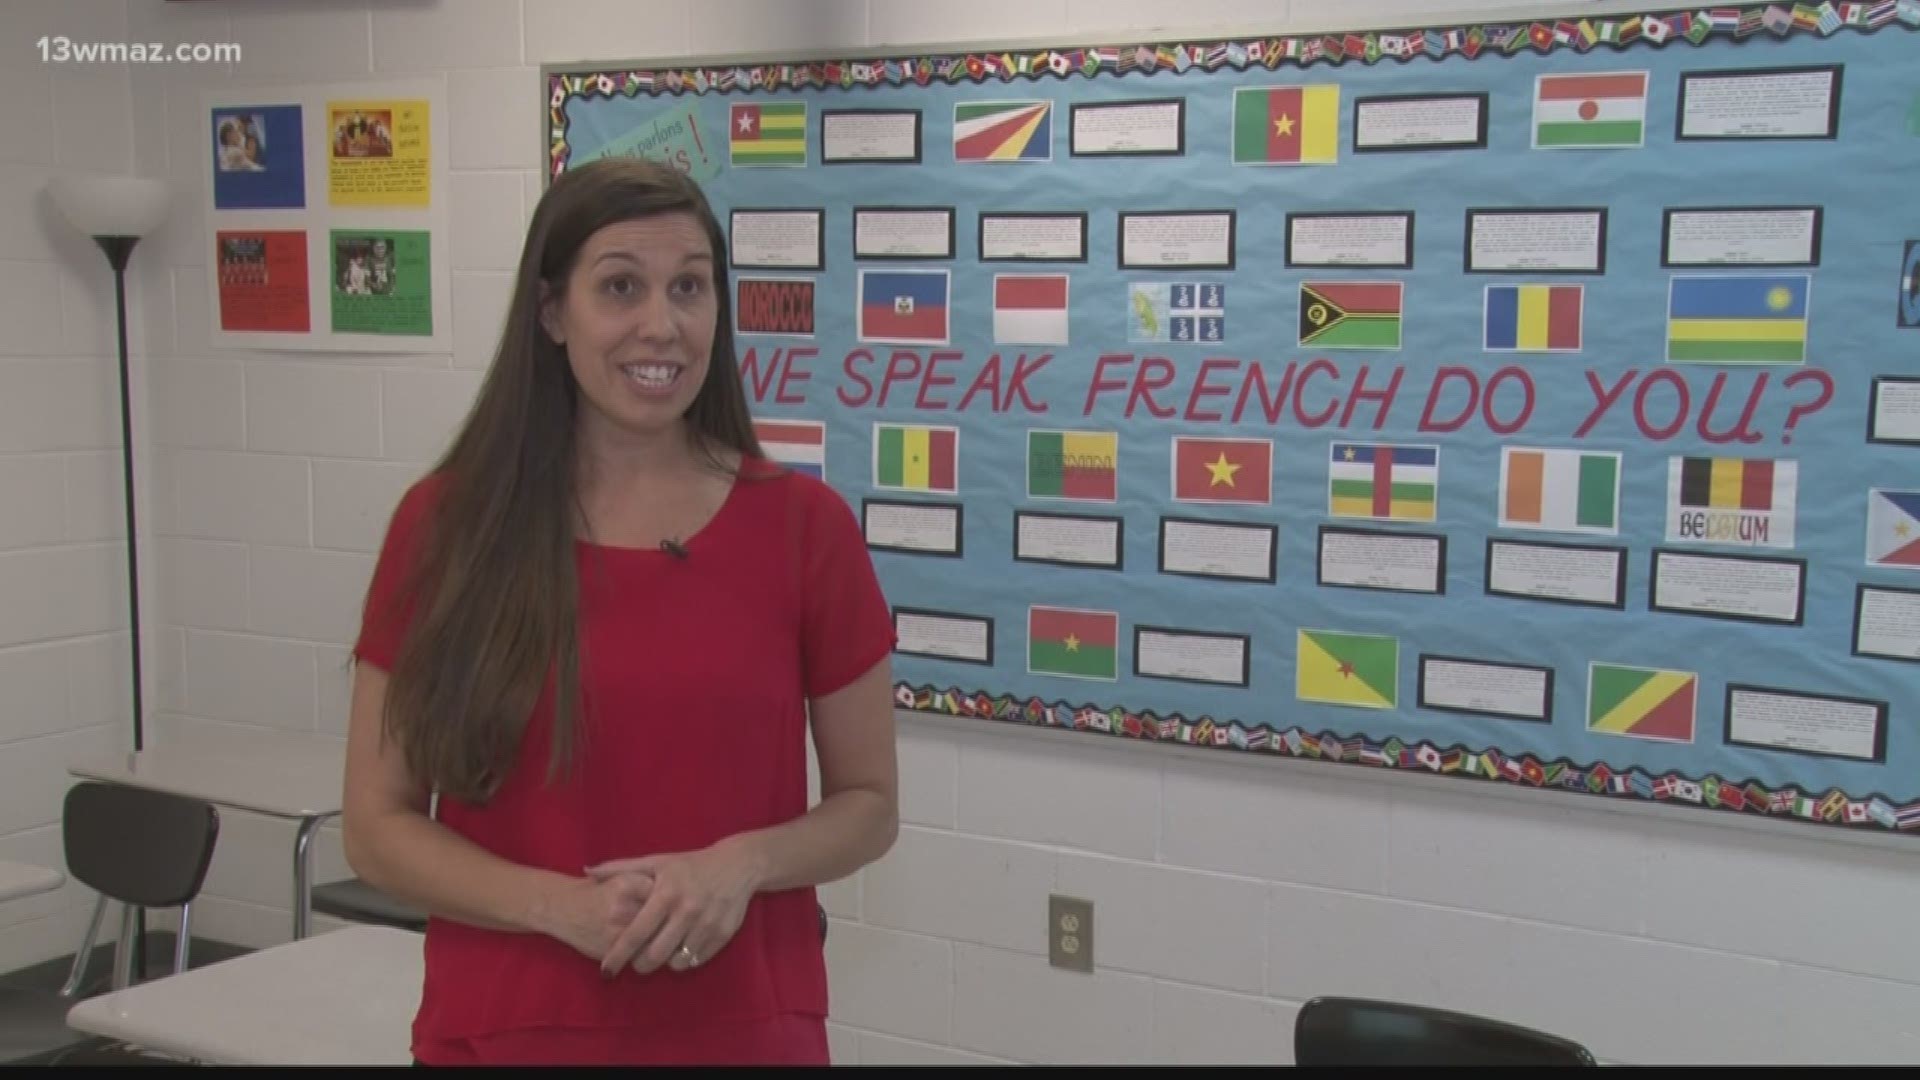 A Dodge County High School teacher will enjoy a free cruise for two after winning a contest for sharing her triumphant journey of becoming a teacher and inspiring her students.